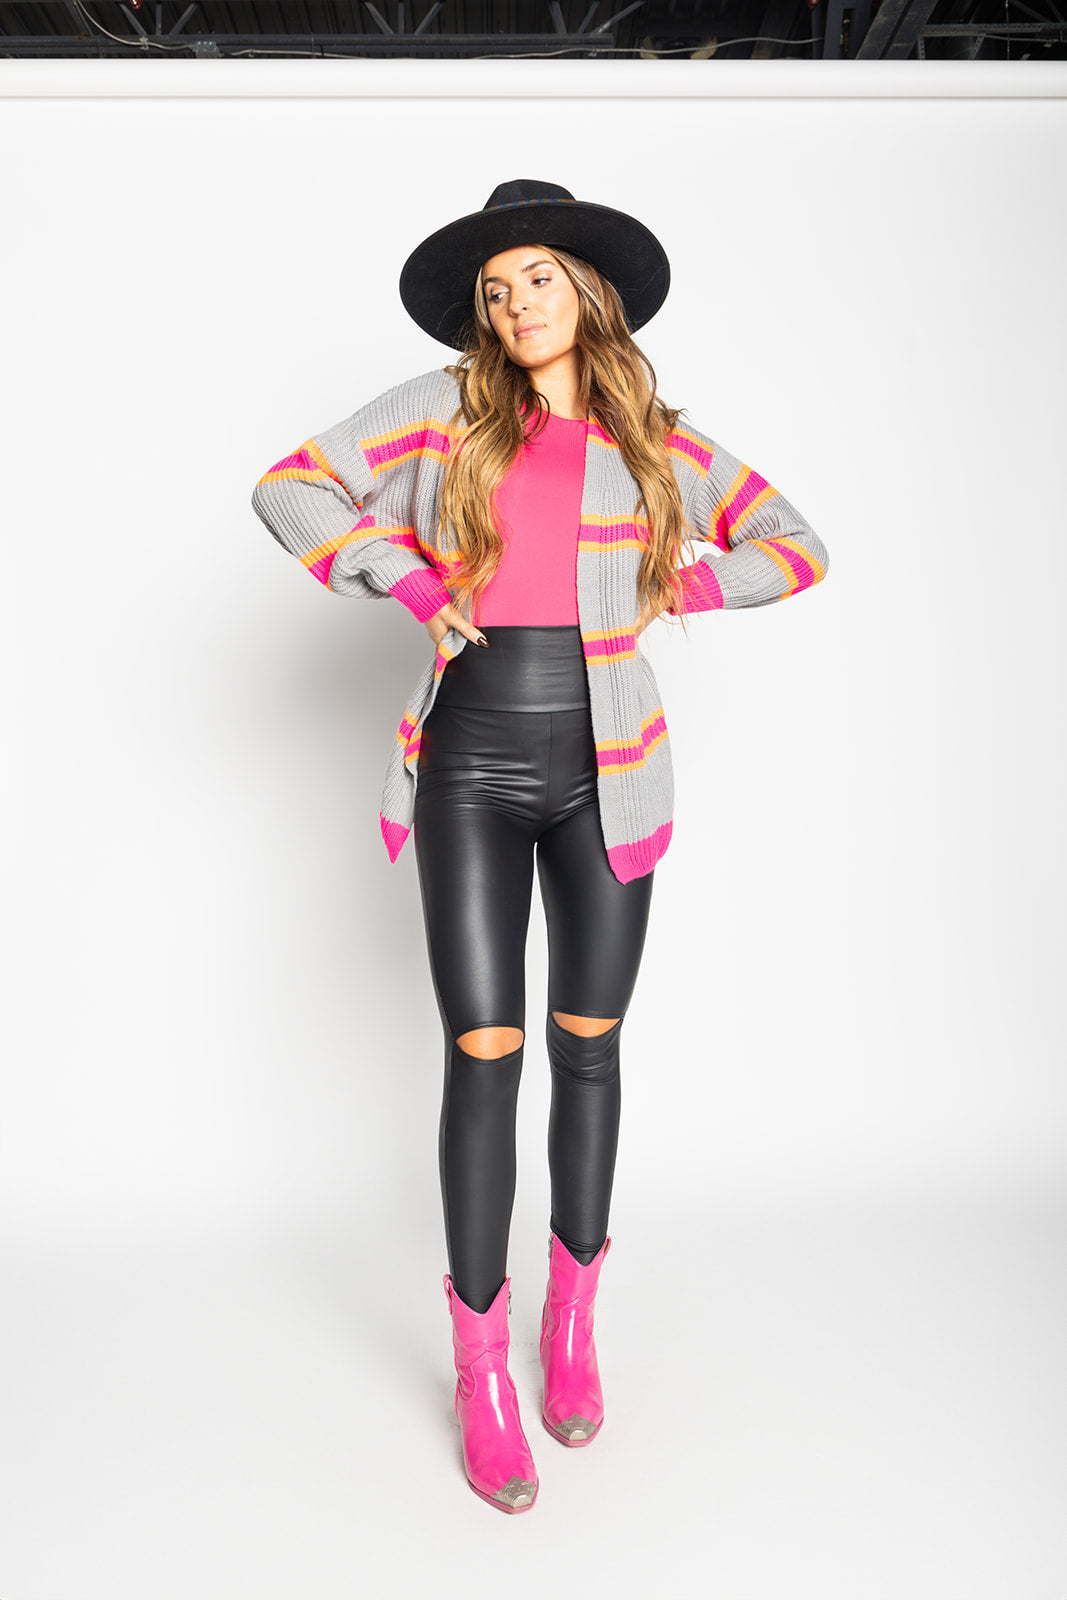 Meet You There Faux Leather Leggings [S-3X]